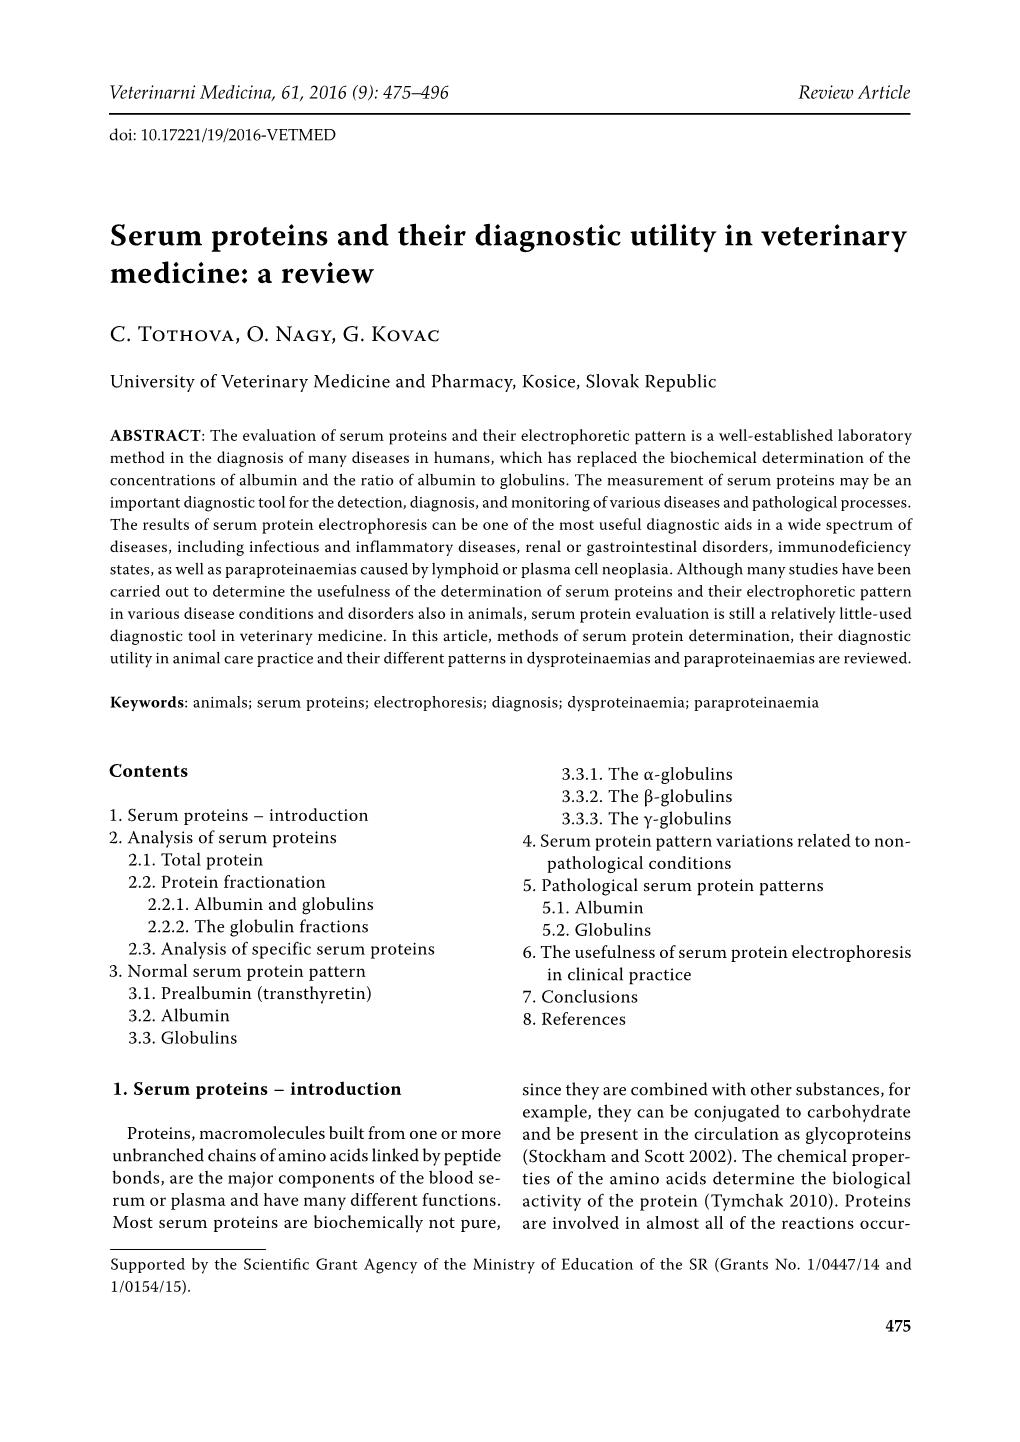 Serum Proteins and Their Diagnostic Utility in Veterinary Medicine: a Review